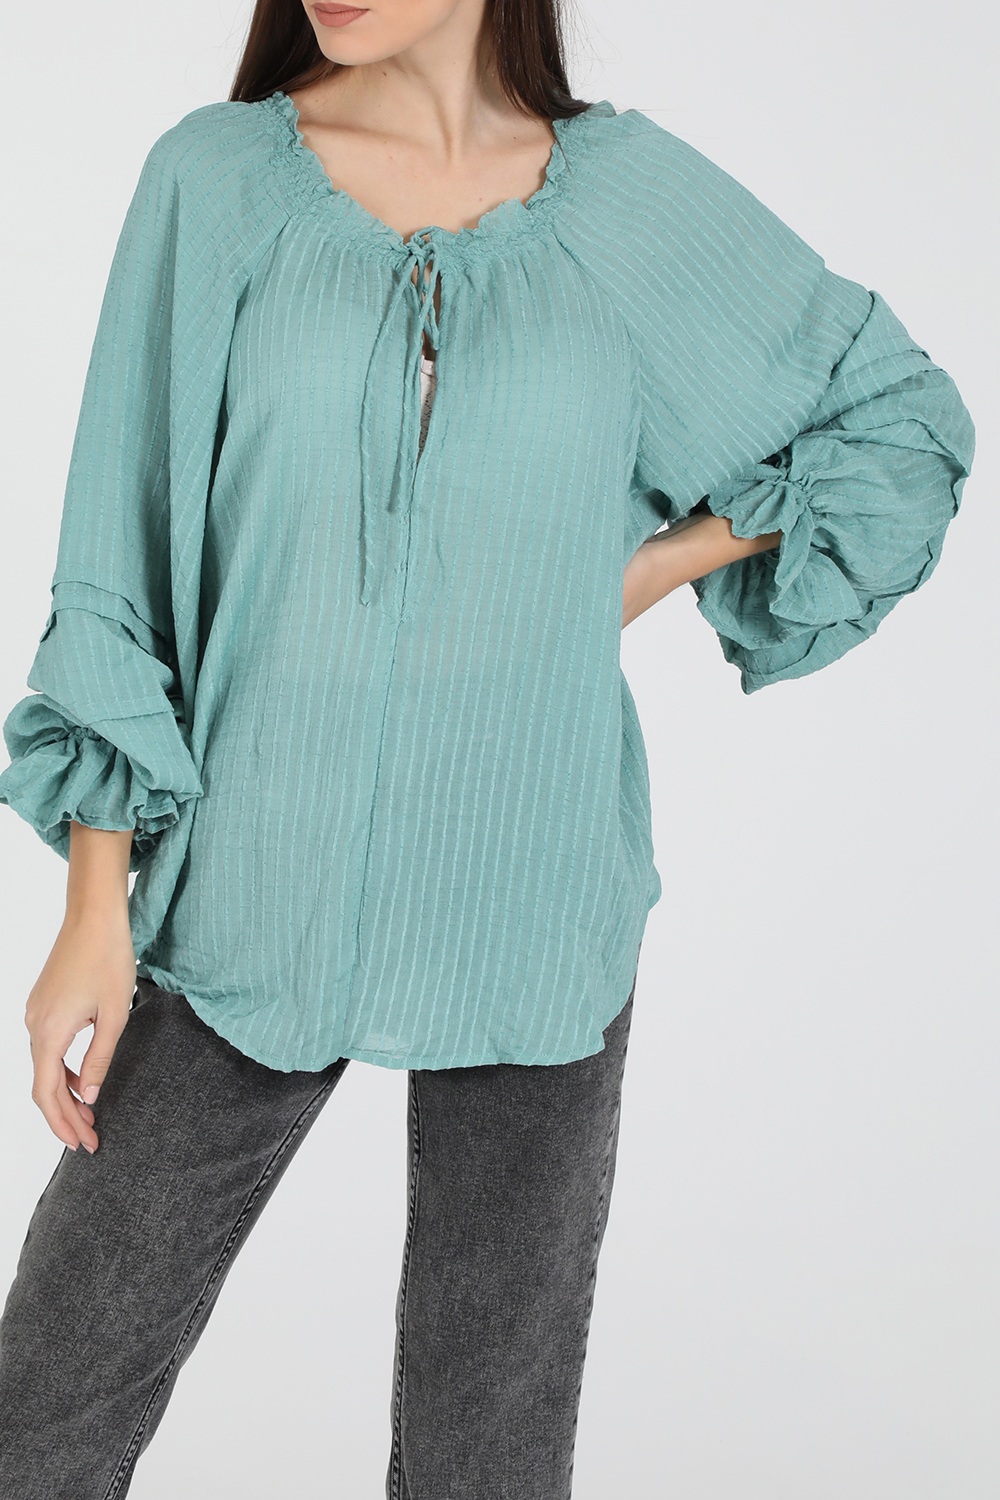 FREE PEOPLE COLLECTION – Γυναικεία μπλούζα FREE PEOPLE OUT OF TOP μπλε 1825862.0-1361